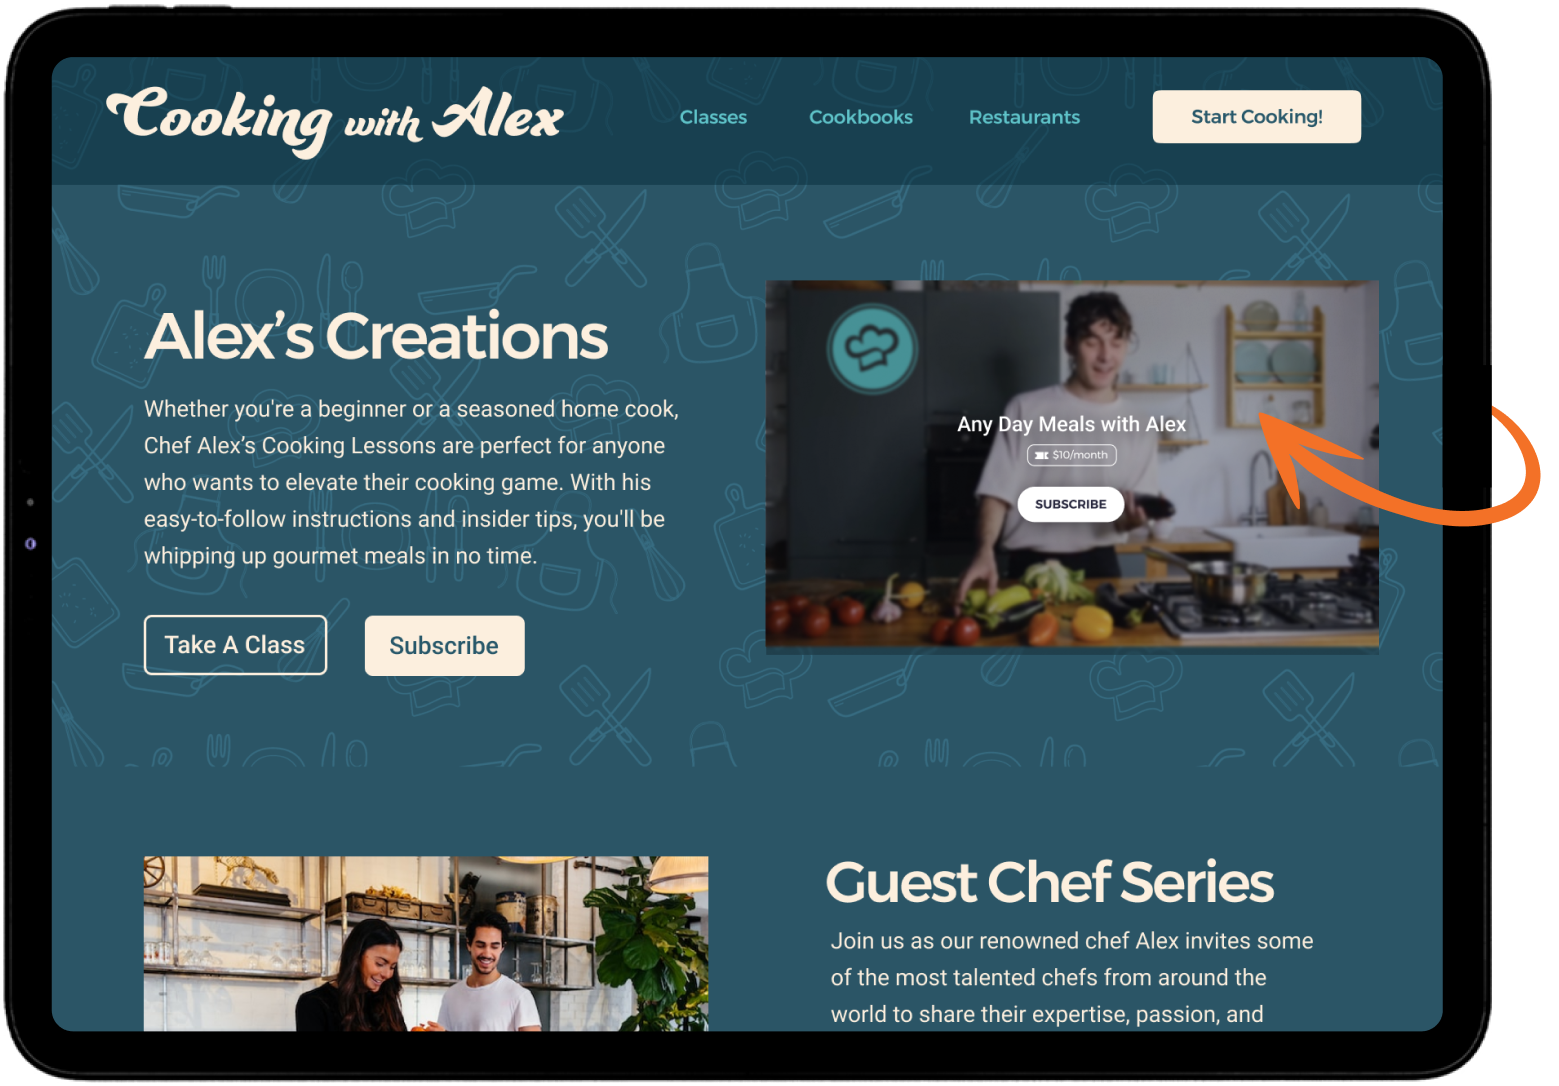 Example video subscription or video membership website for cooking experts